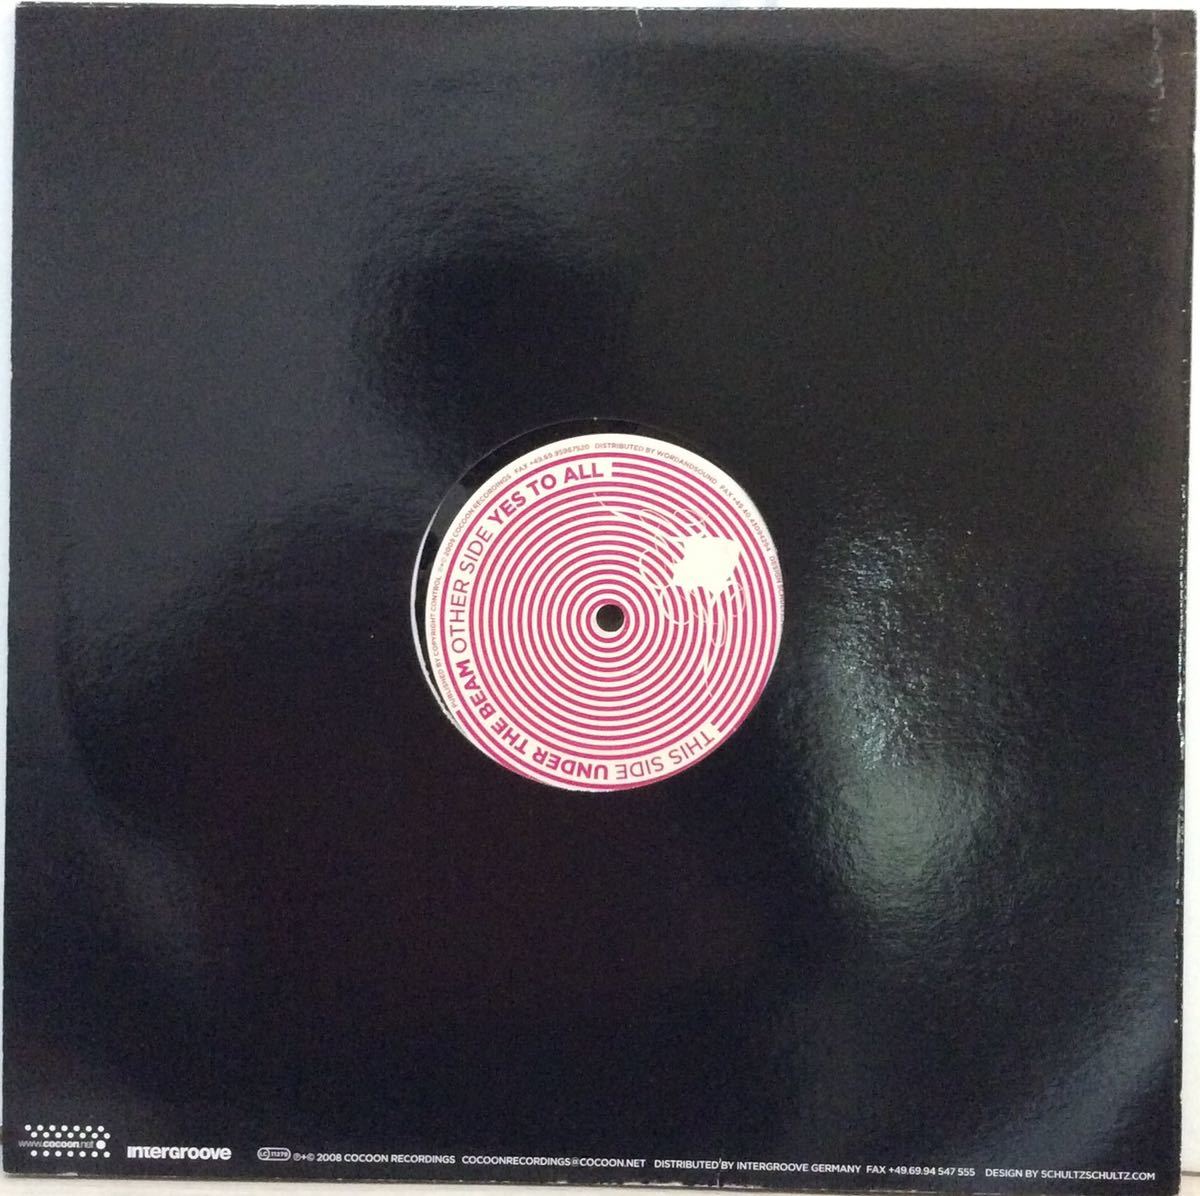 Stefan Goldmann - Yes To All /Cocoon Recordings COR12"064の画像2